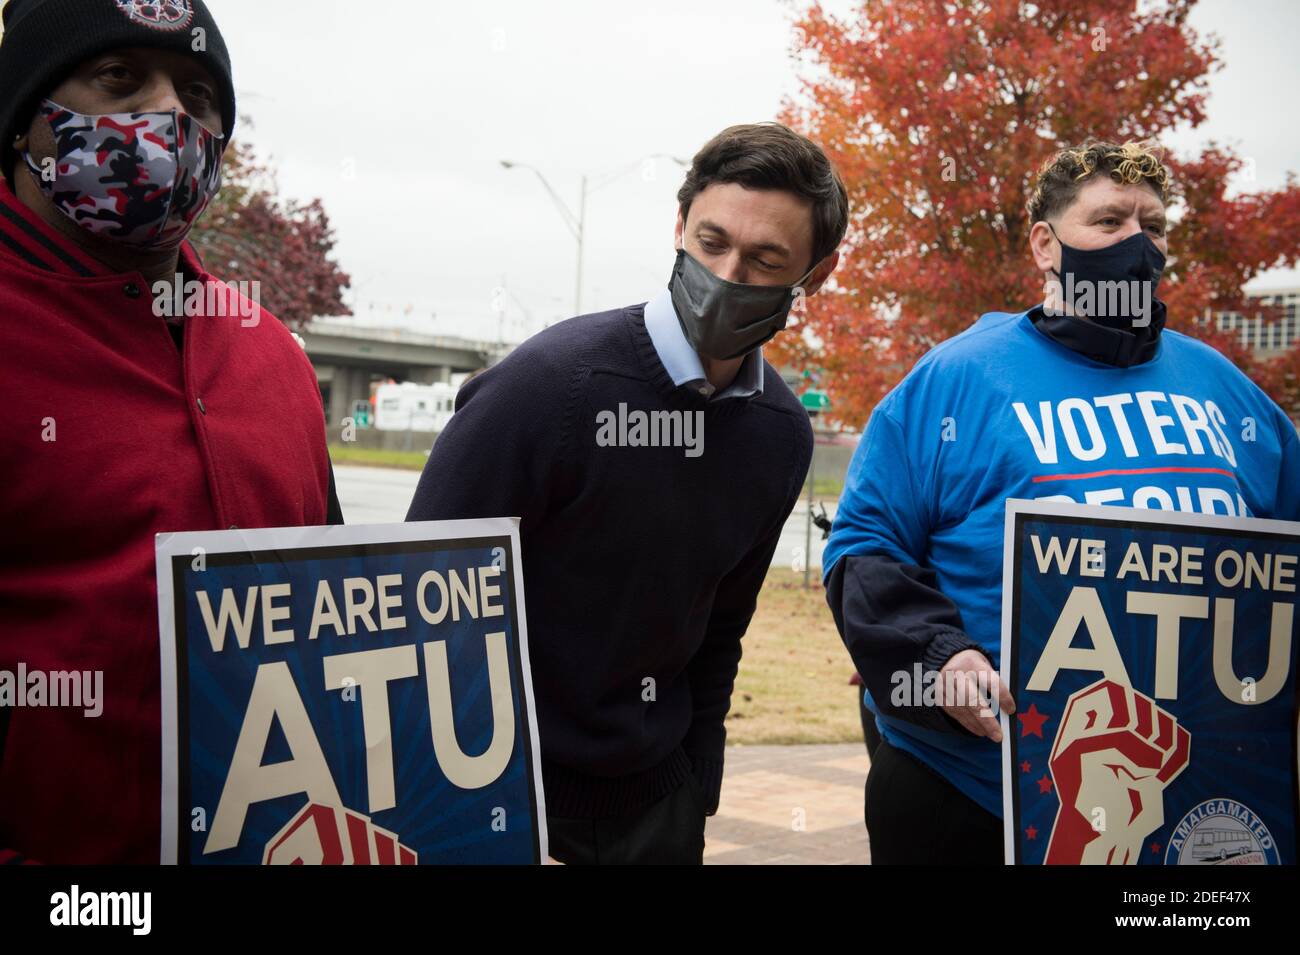 Atlanta, GA, USA. 30th Nov, 2020. JON OSSOFF, democratic candidate for one of two Georgia seats in the U.S. Senate in January 2021 runoff election, meets with members of several unions at a press conference Monday outside a union meeting hall. Ossoff said he questioned Sen. David PerdueÃs explanations about the senatorÃs investments in medical supply companies following information briefing about the Covid-19 virus earlier this year. A debate between the two candidates was scheduled for next weekend, but Sen. Perdue has declined to participate.Pictured (Credit Image: © Robin Rayne/ZUMA Stock Photo